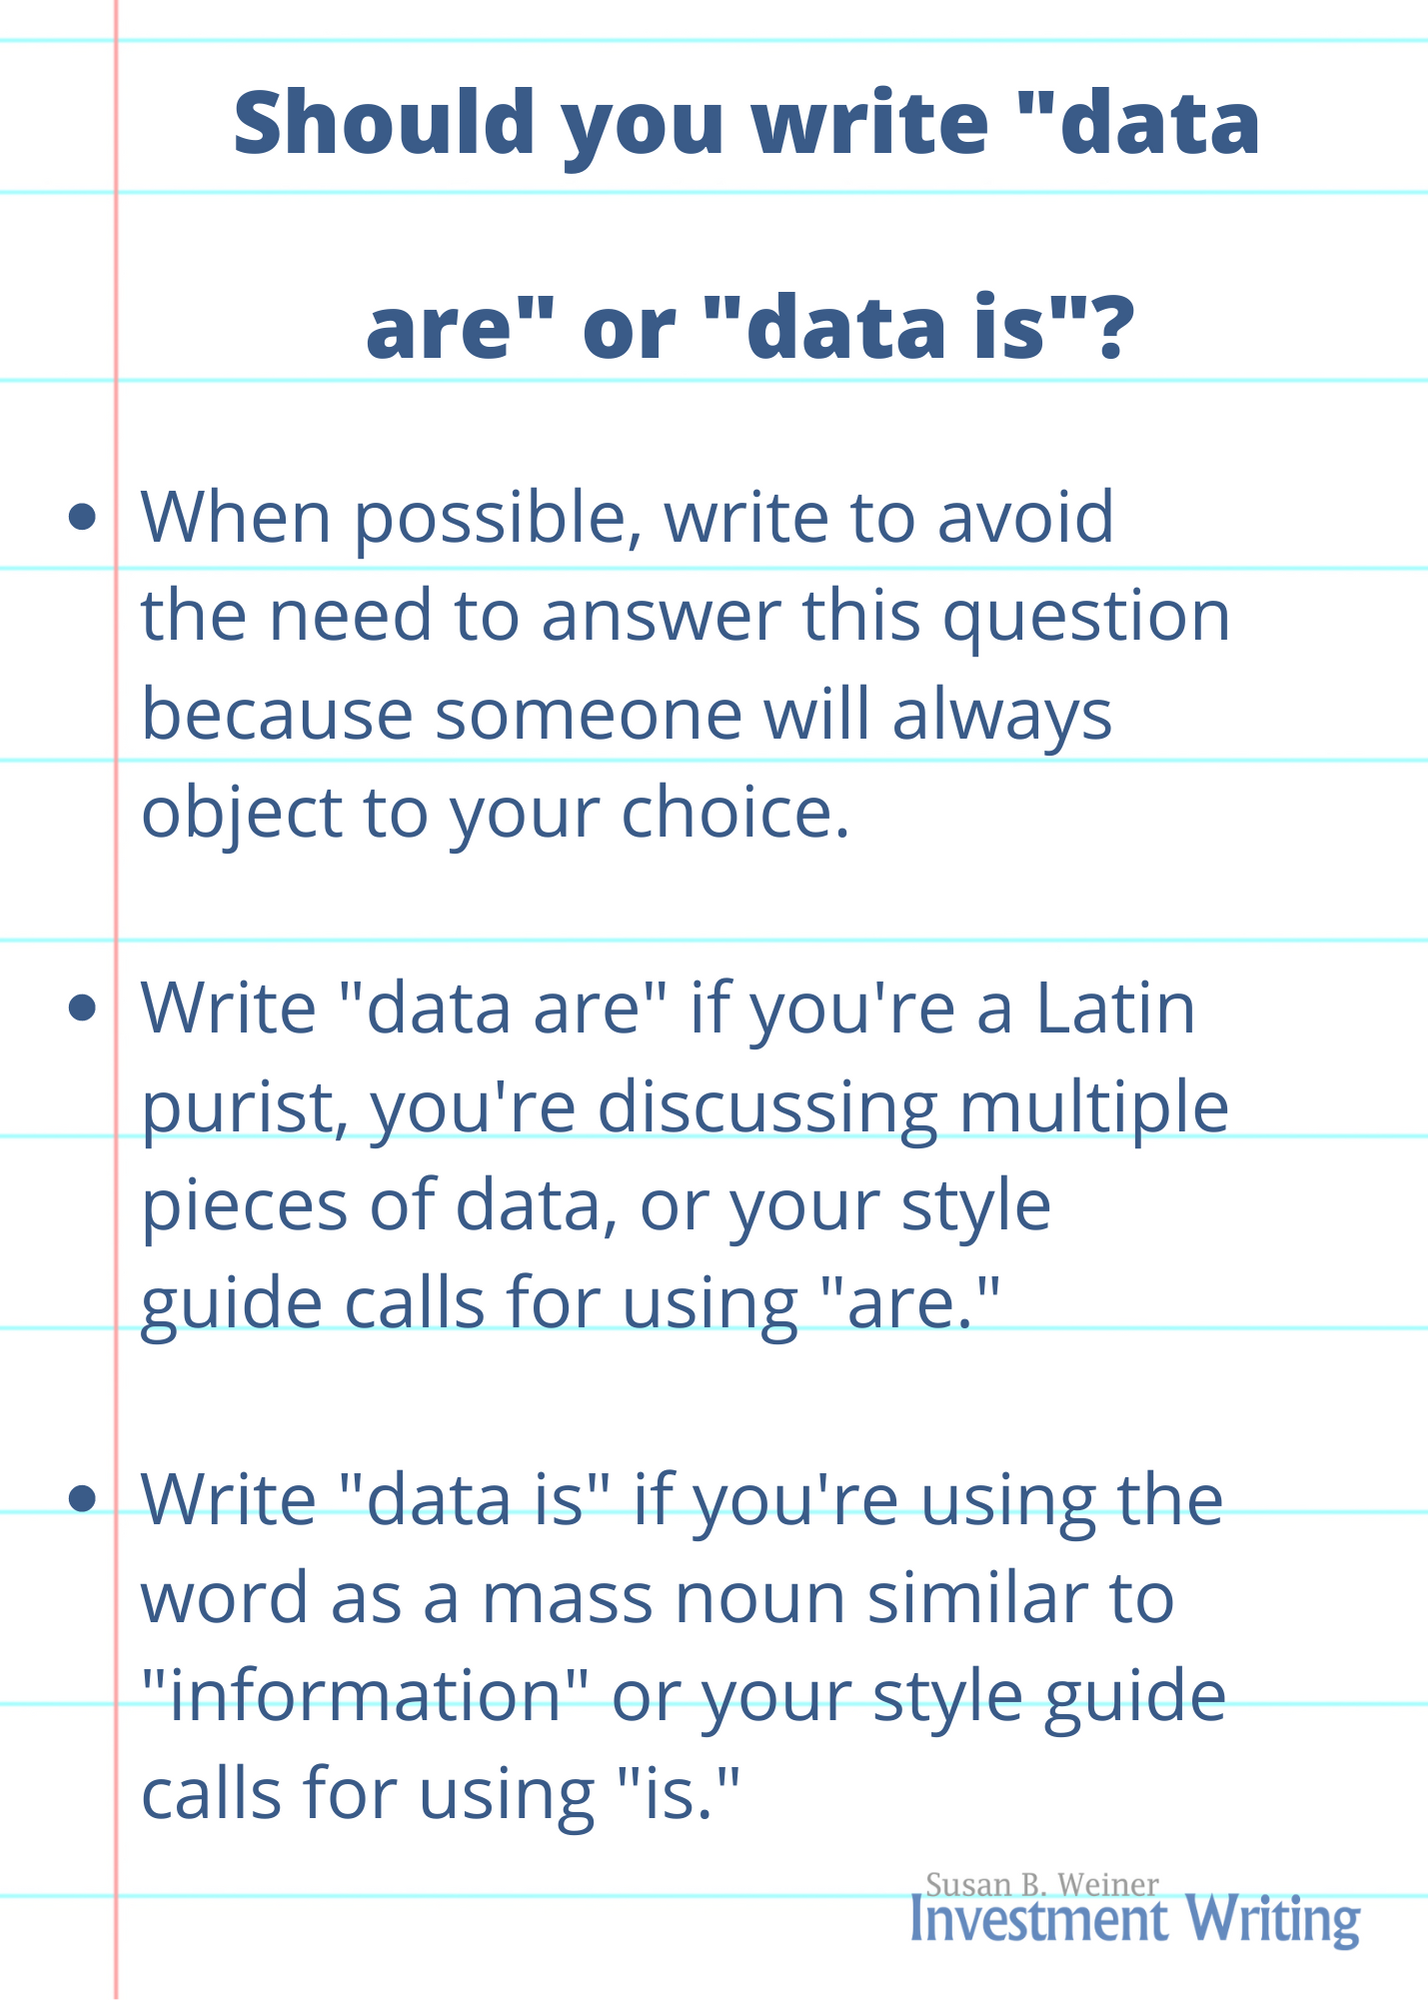 Should you write "data are" or "data is"?